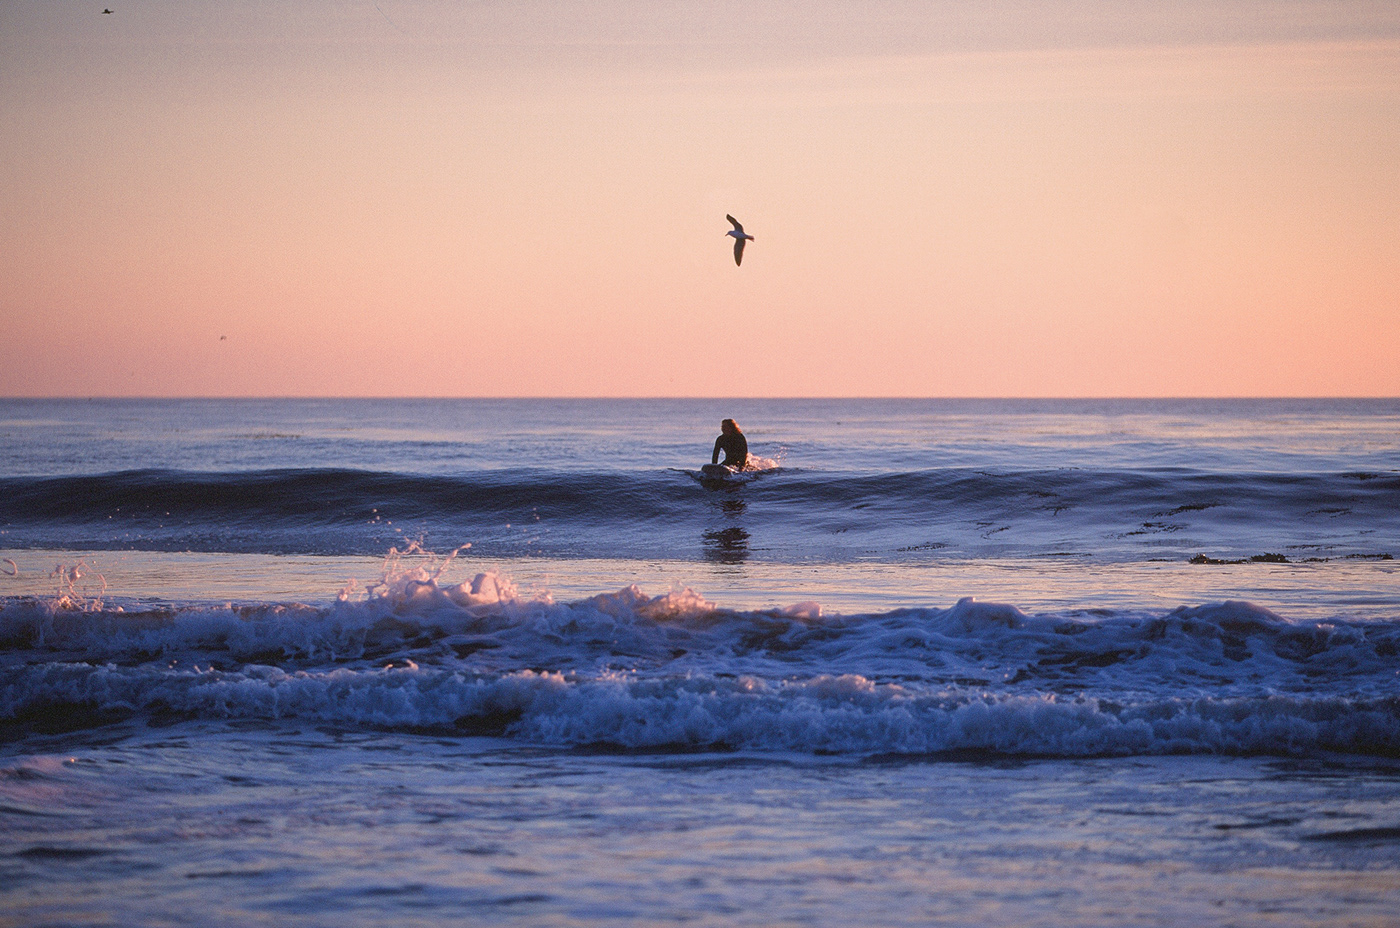 a seagull flies over a surfer at sunset
